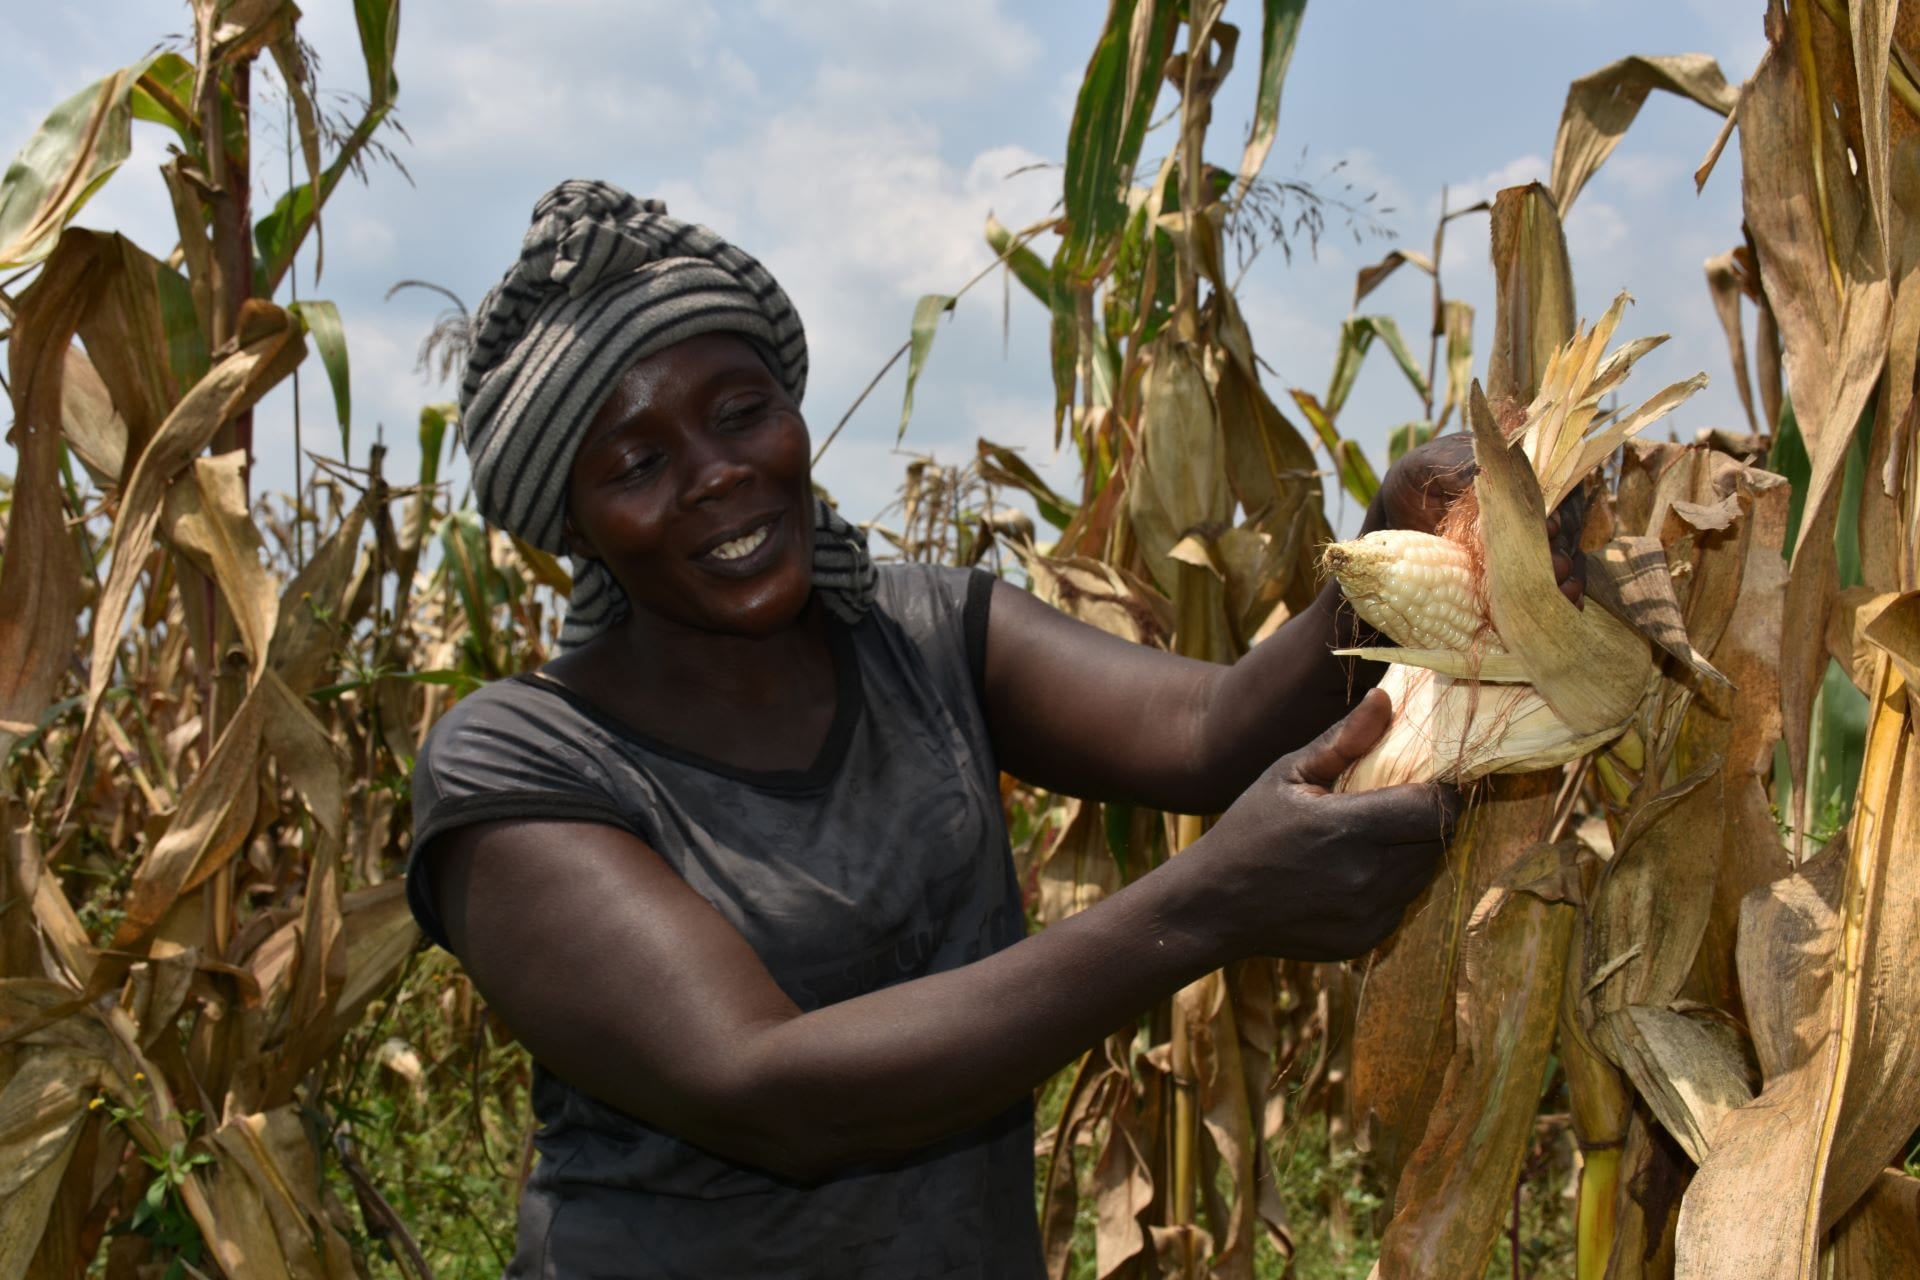 Alinda Sarah demostrates how happy she is with the maize cob due for harvest on the farm she owns with her husband in Masindi, mid-western Uganda. (Photo: Joshua Masinde/CIMMYT)